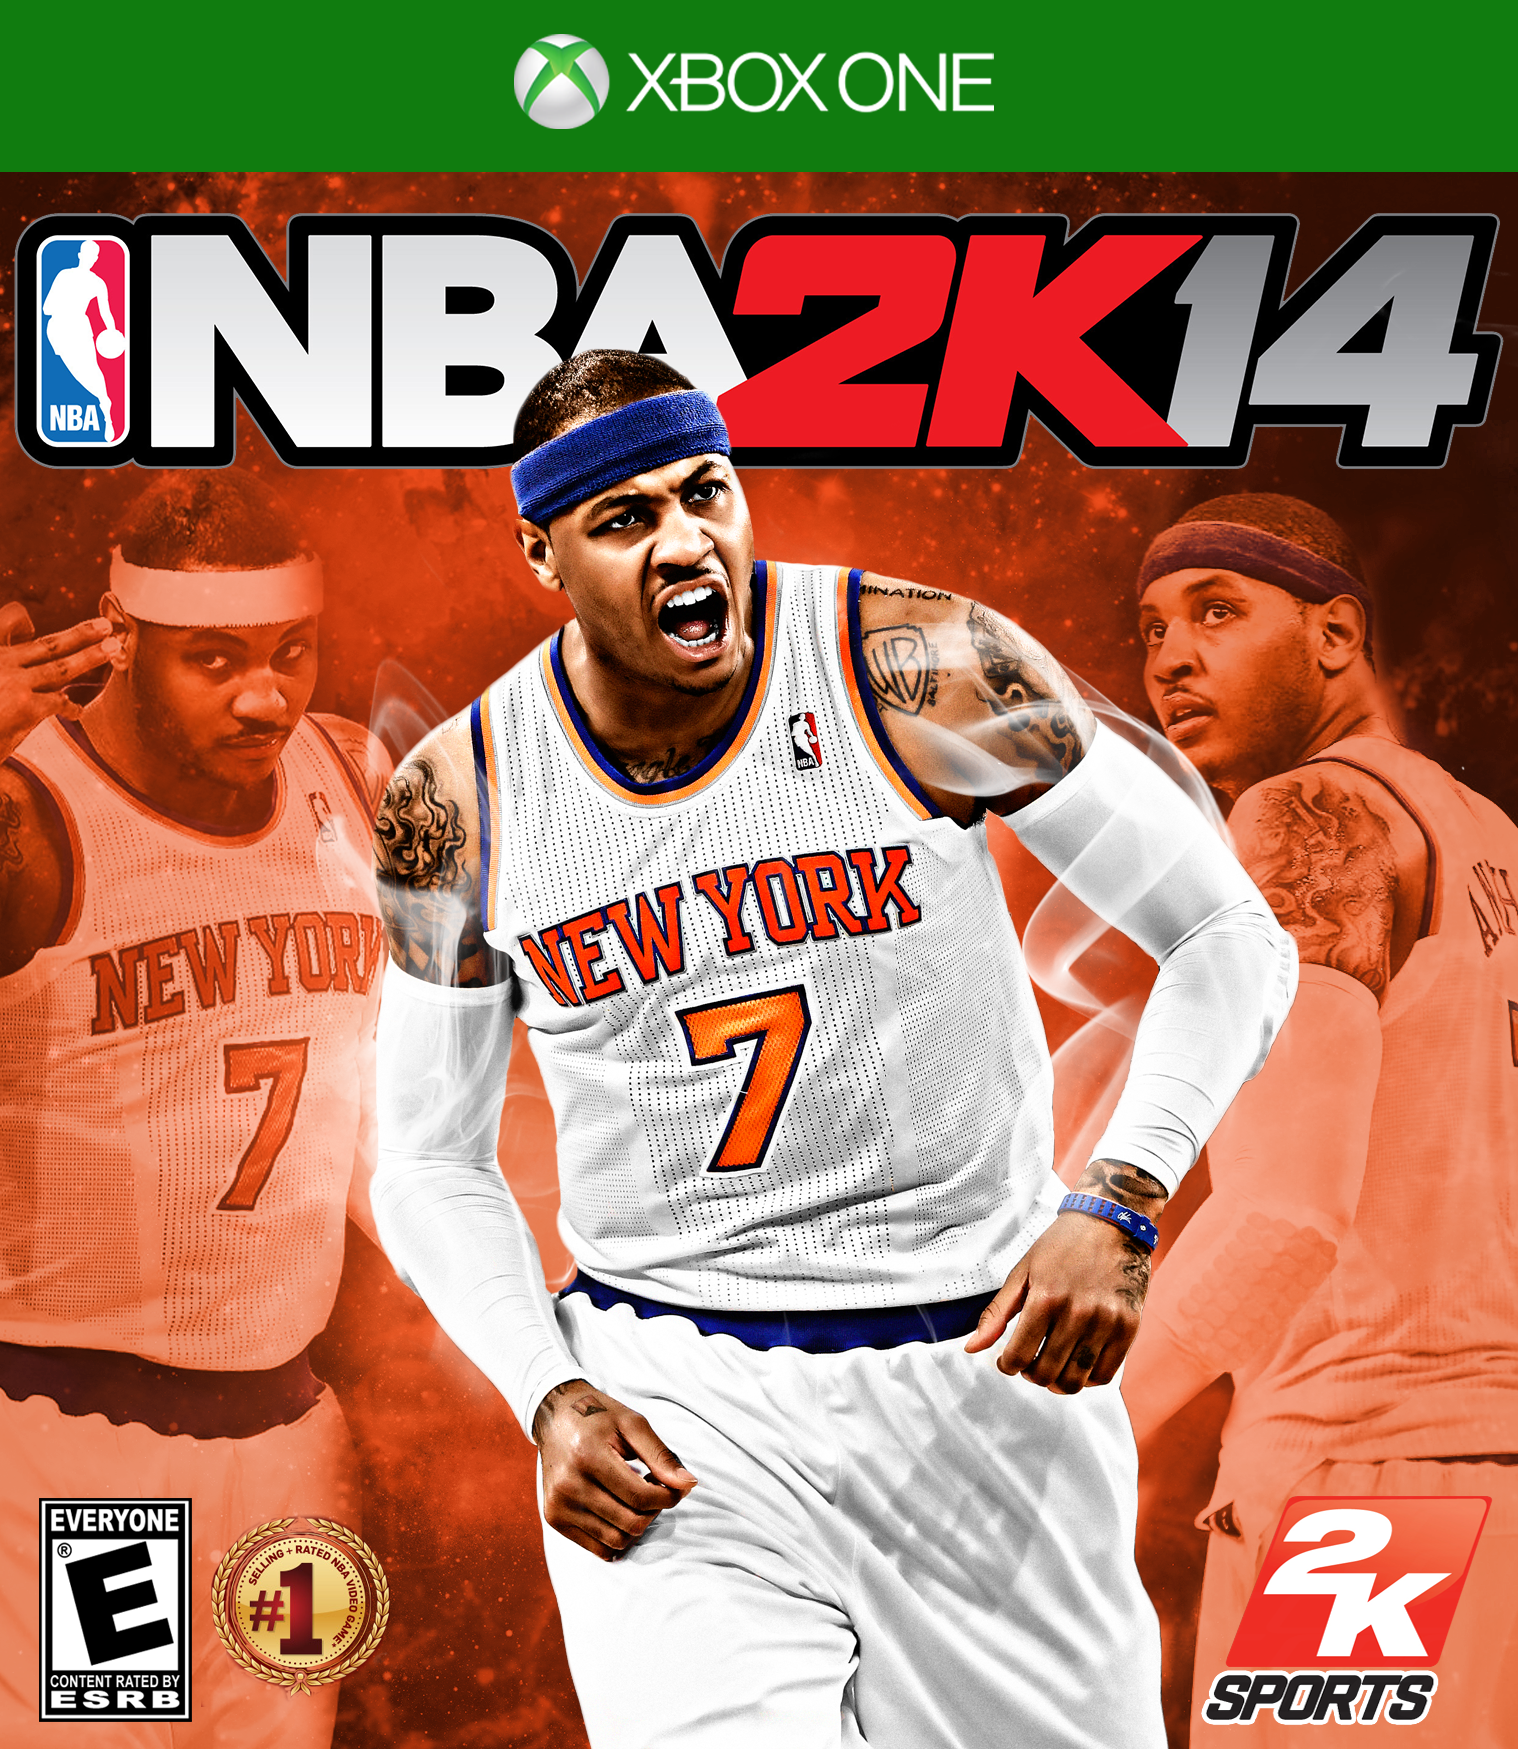 NBA 2K14 Covers - Page 26 - Operation Sports Forums